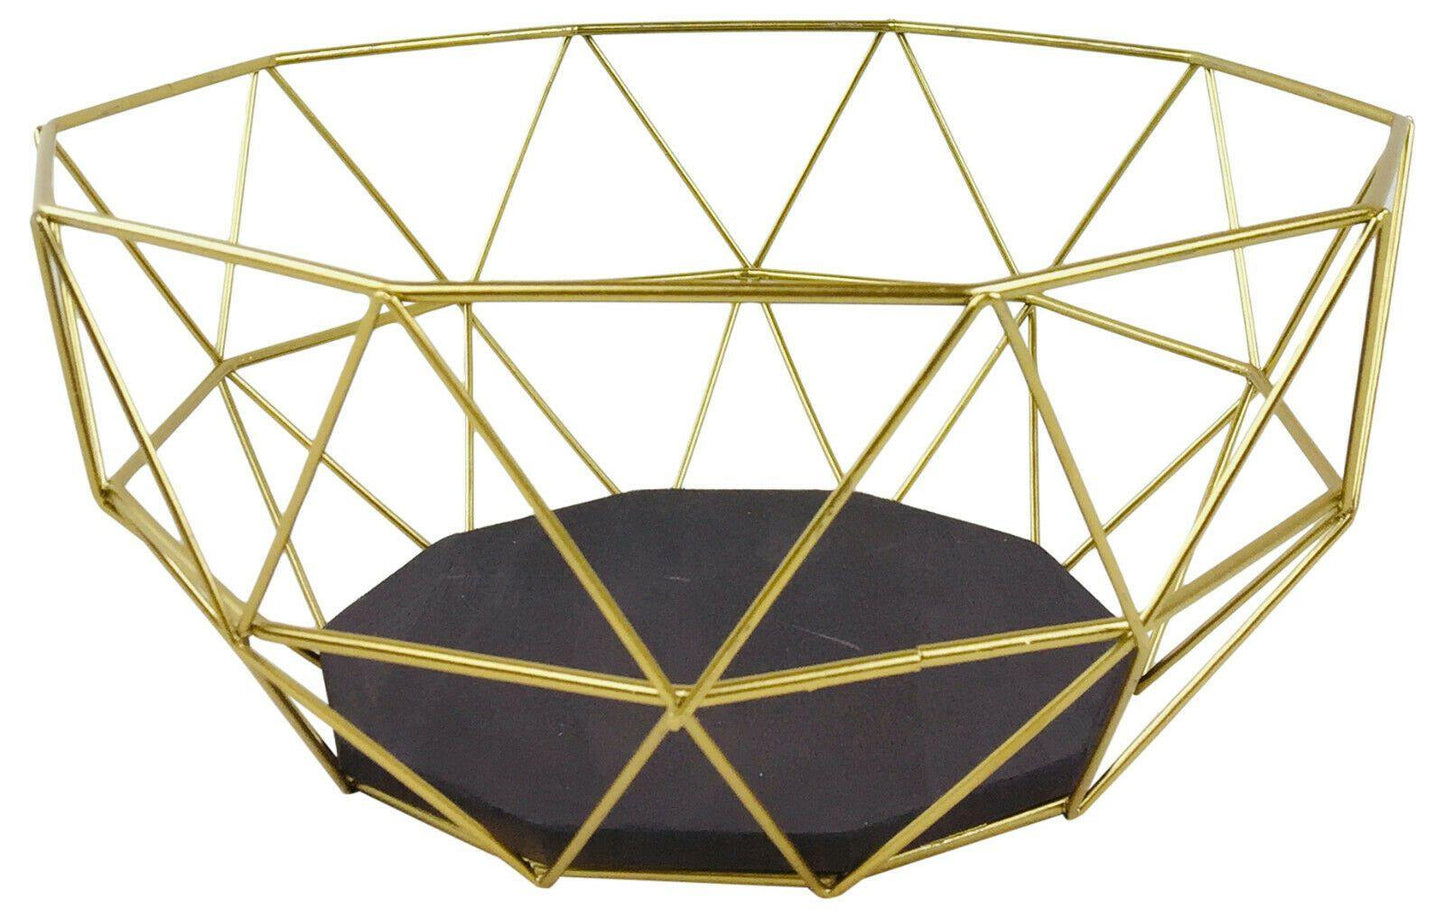 Golden Geometric Style Wire Fruit Storage Display Bowl - Home Inspired Gifts